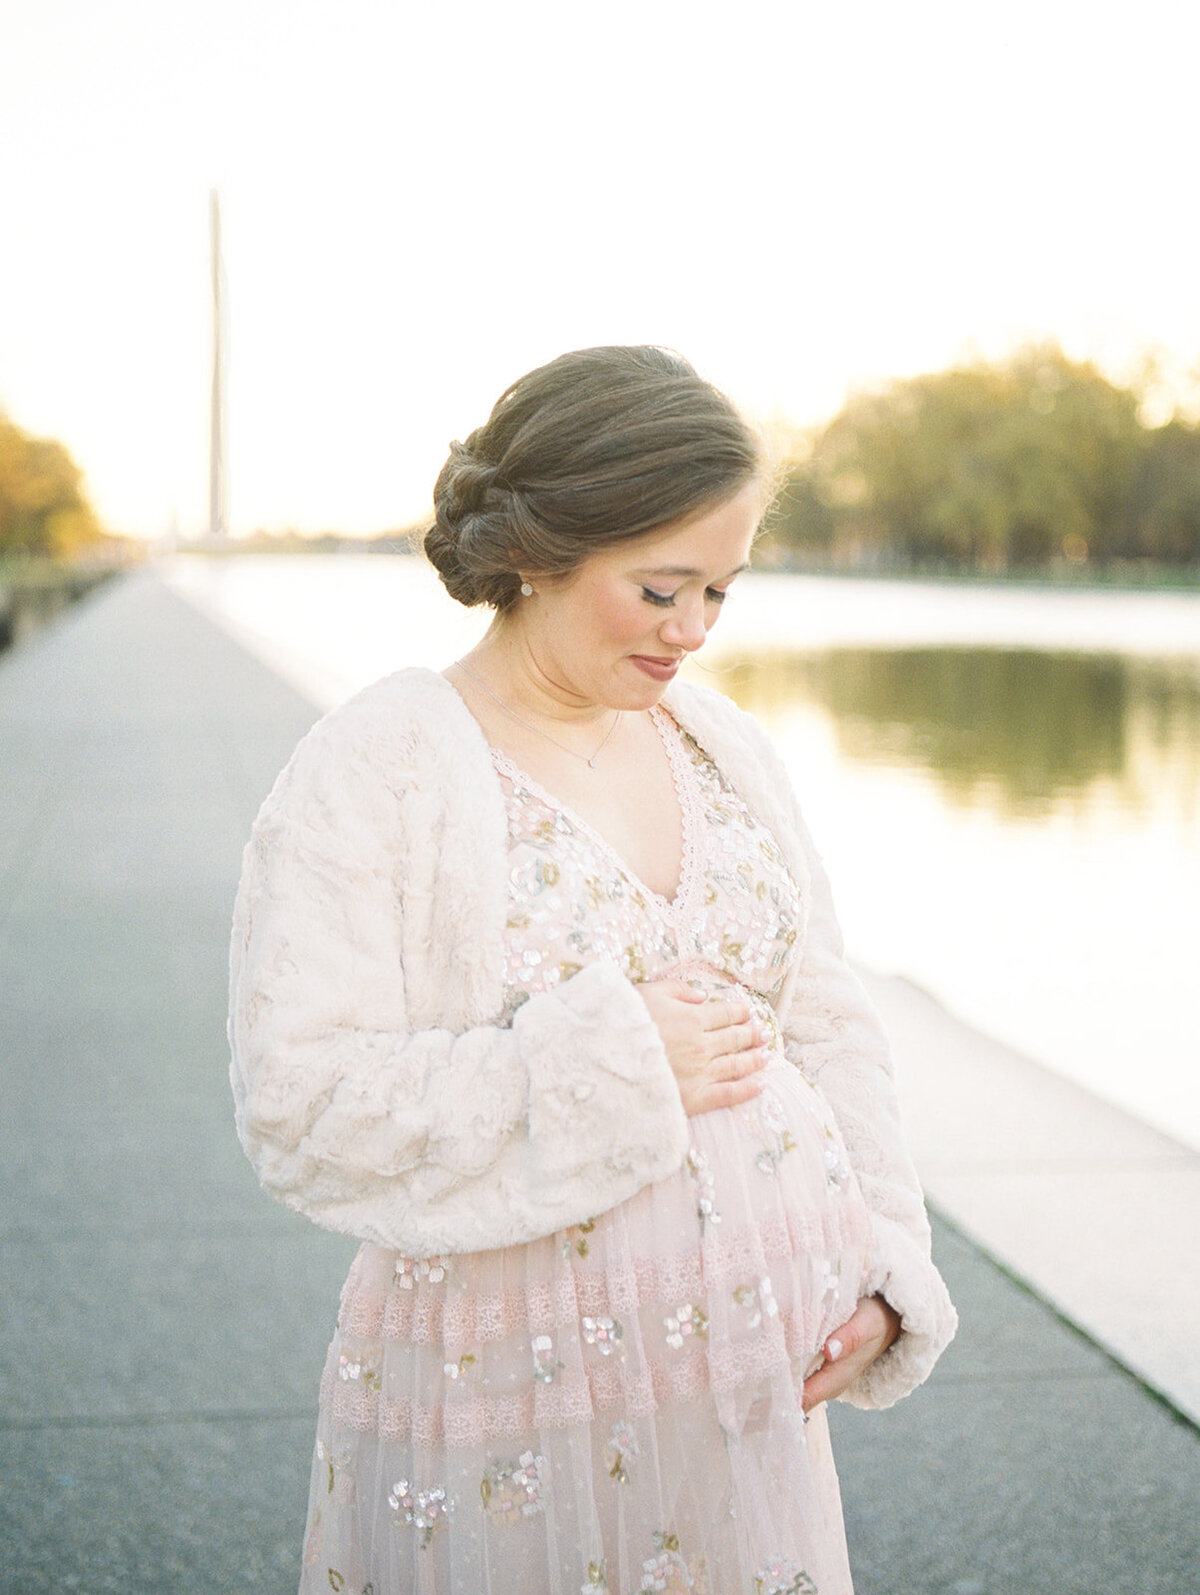 Pregnant mother with pink Needle & Thread dress and white fur shawl stands by the Reflecting Pool in DC.